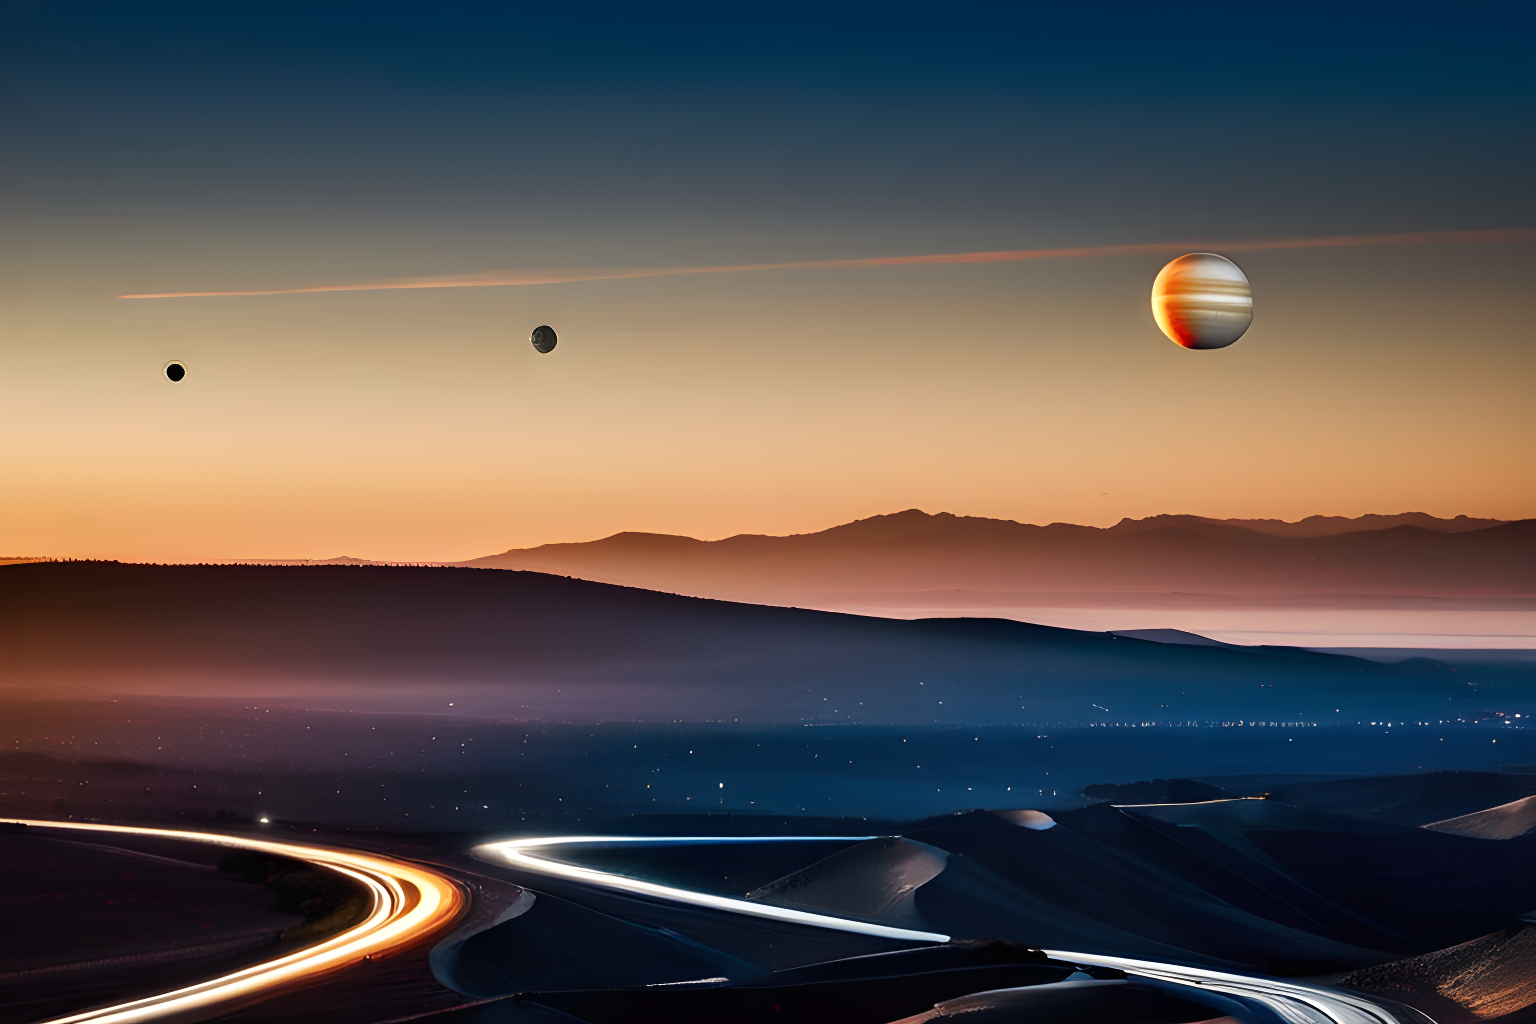 breathtaking photograph of orbiting planets from space